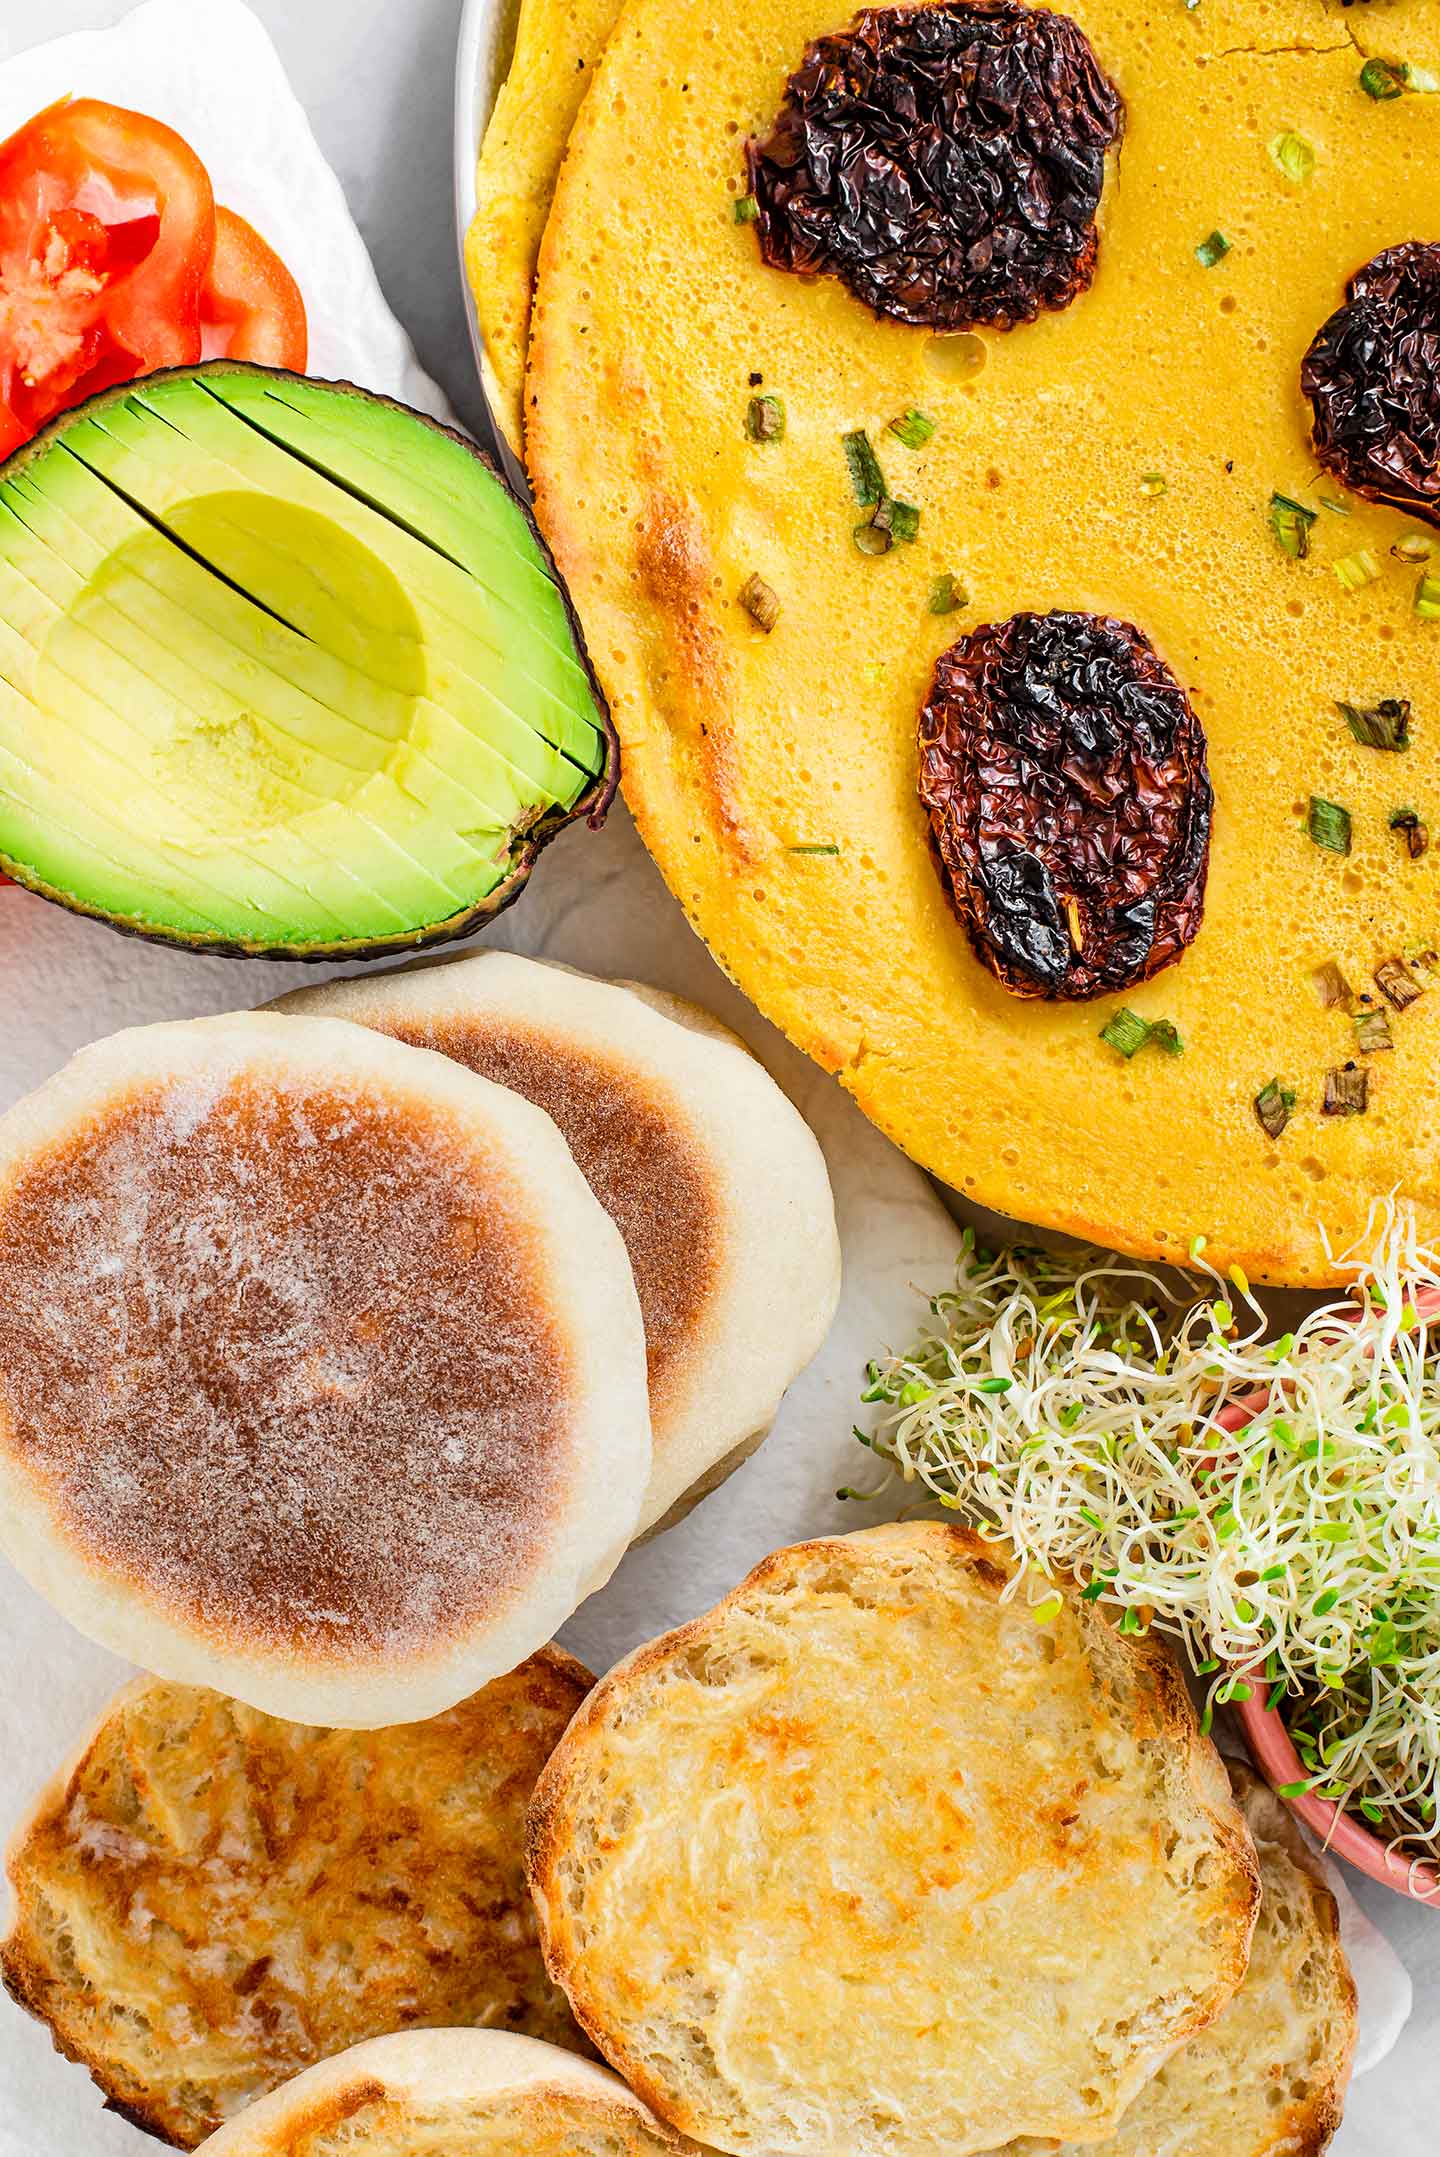 Top down view of a chickpea omelette with sun-dried tomato chourico beside bolos levedos, a sliced avocado, tomato, and sprouts.